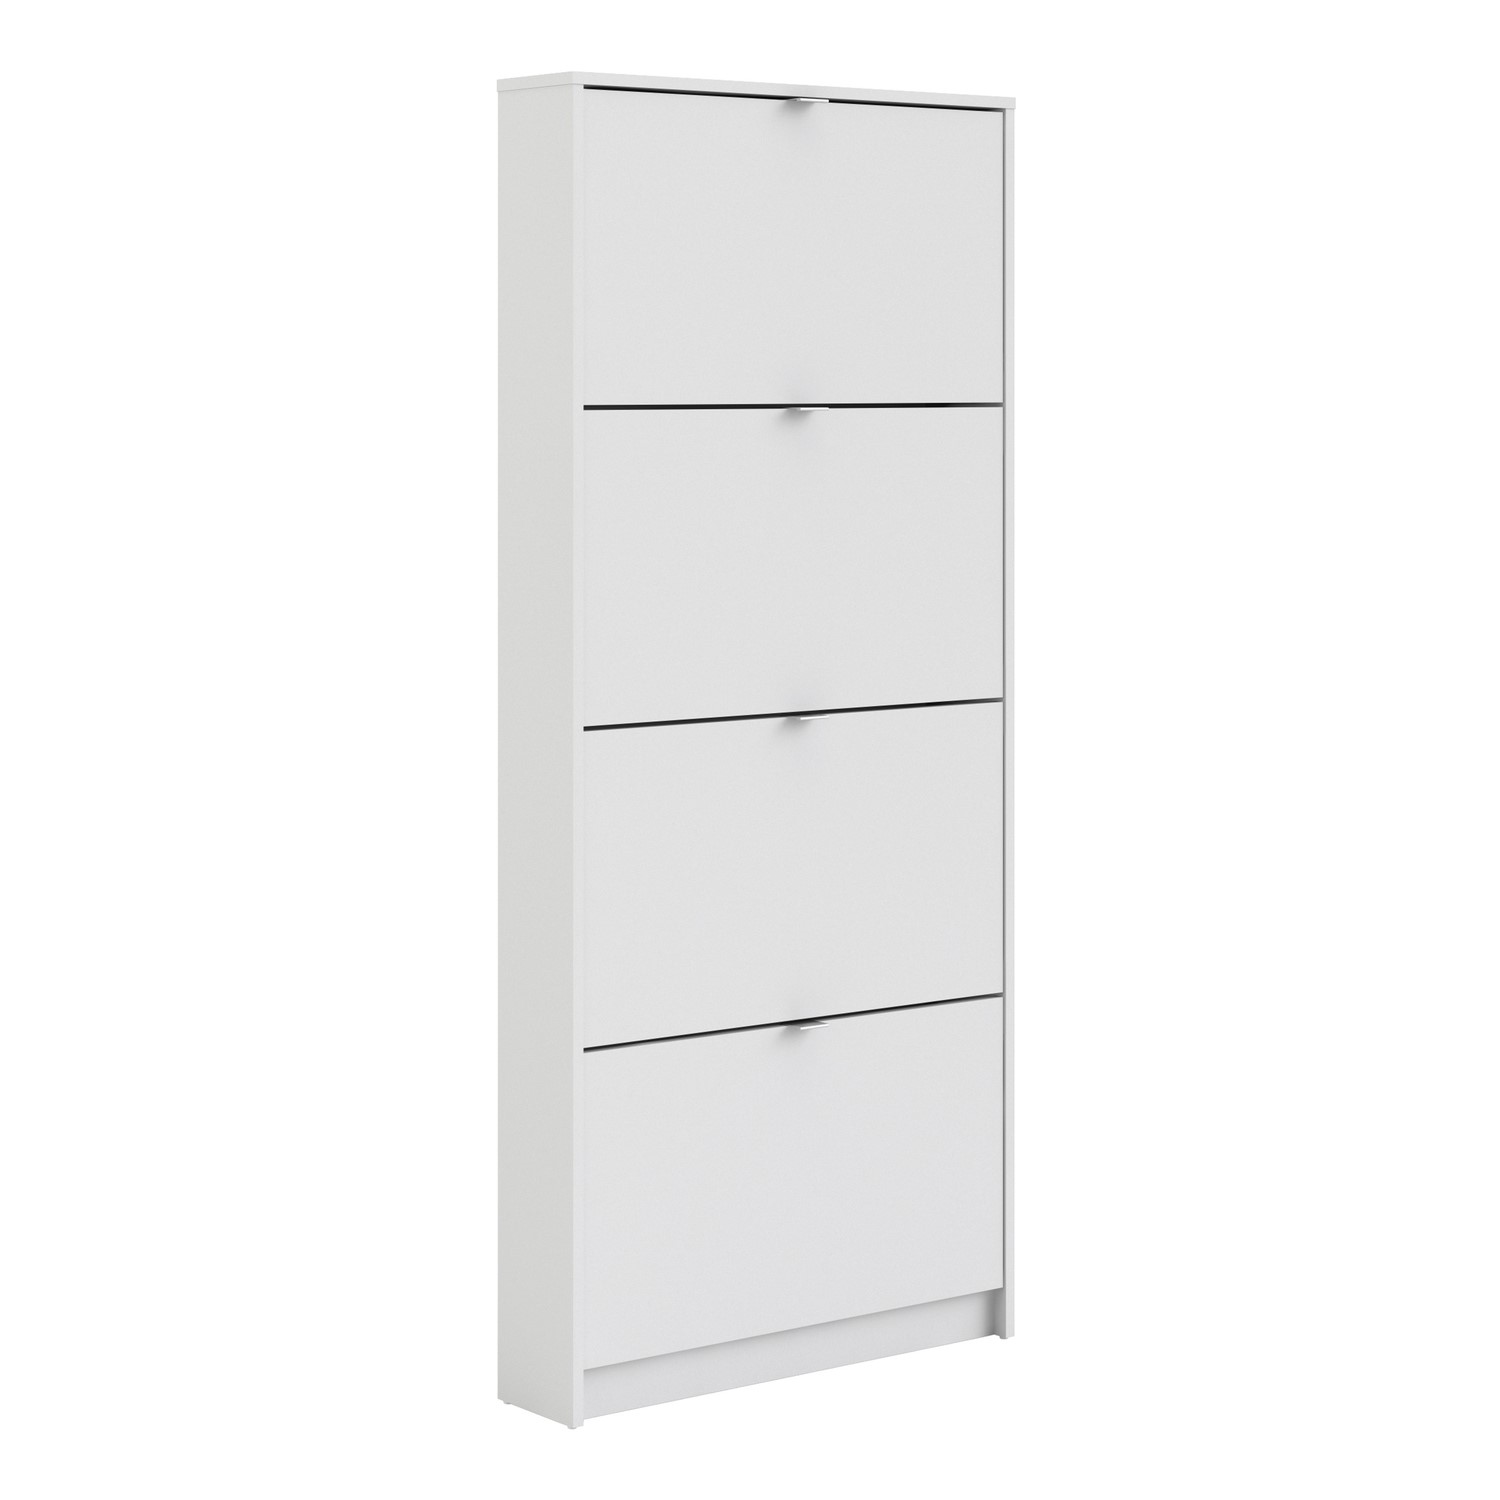 Photo of Slim white wall hung shoe cabinet with 4 drawer - 12 pairs